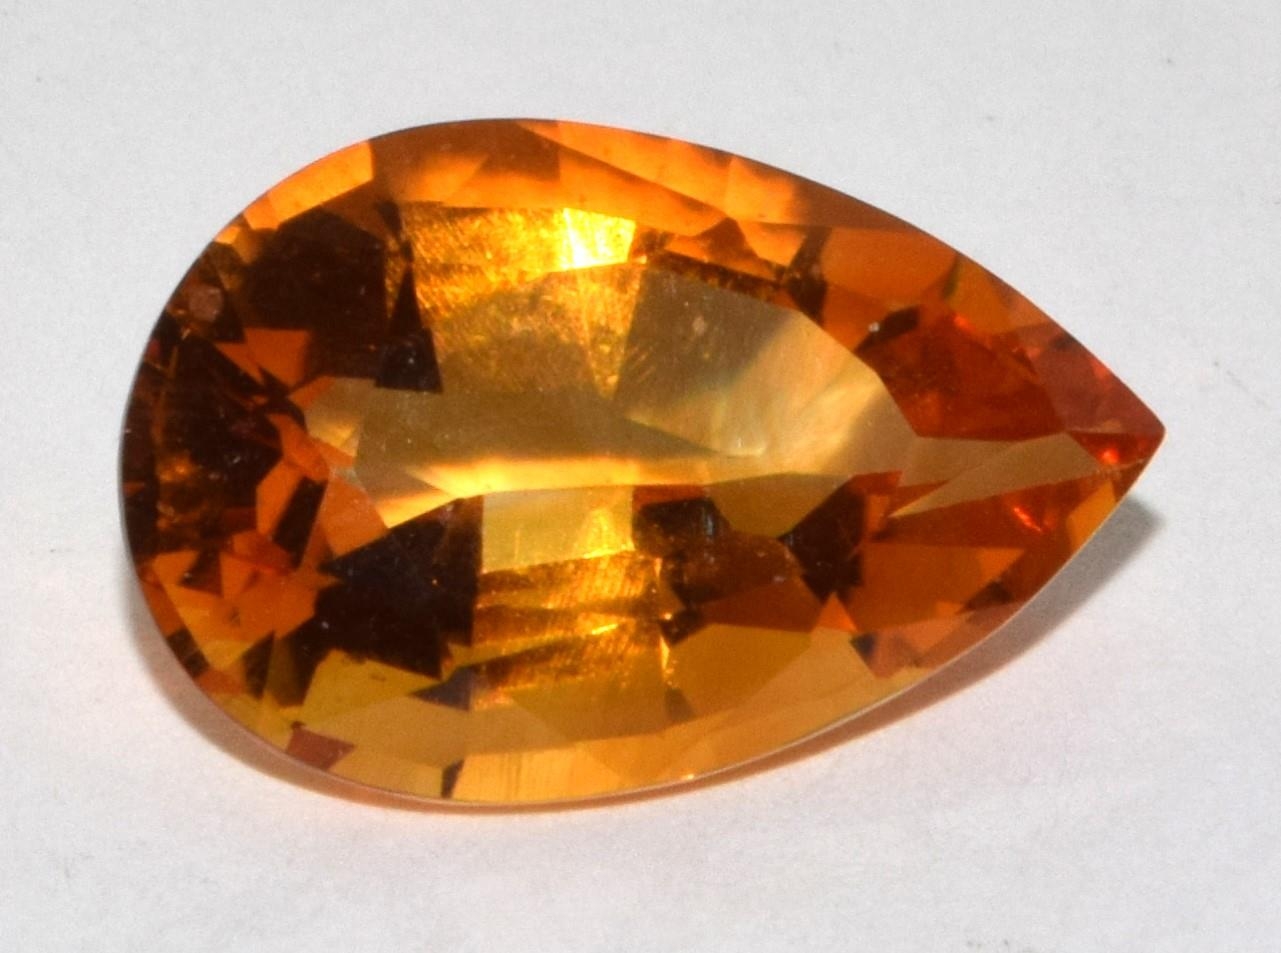 Natural Pear shape Amber coloured Citron single stone approx 6ct - Image 5 of 5